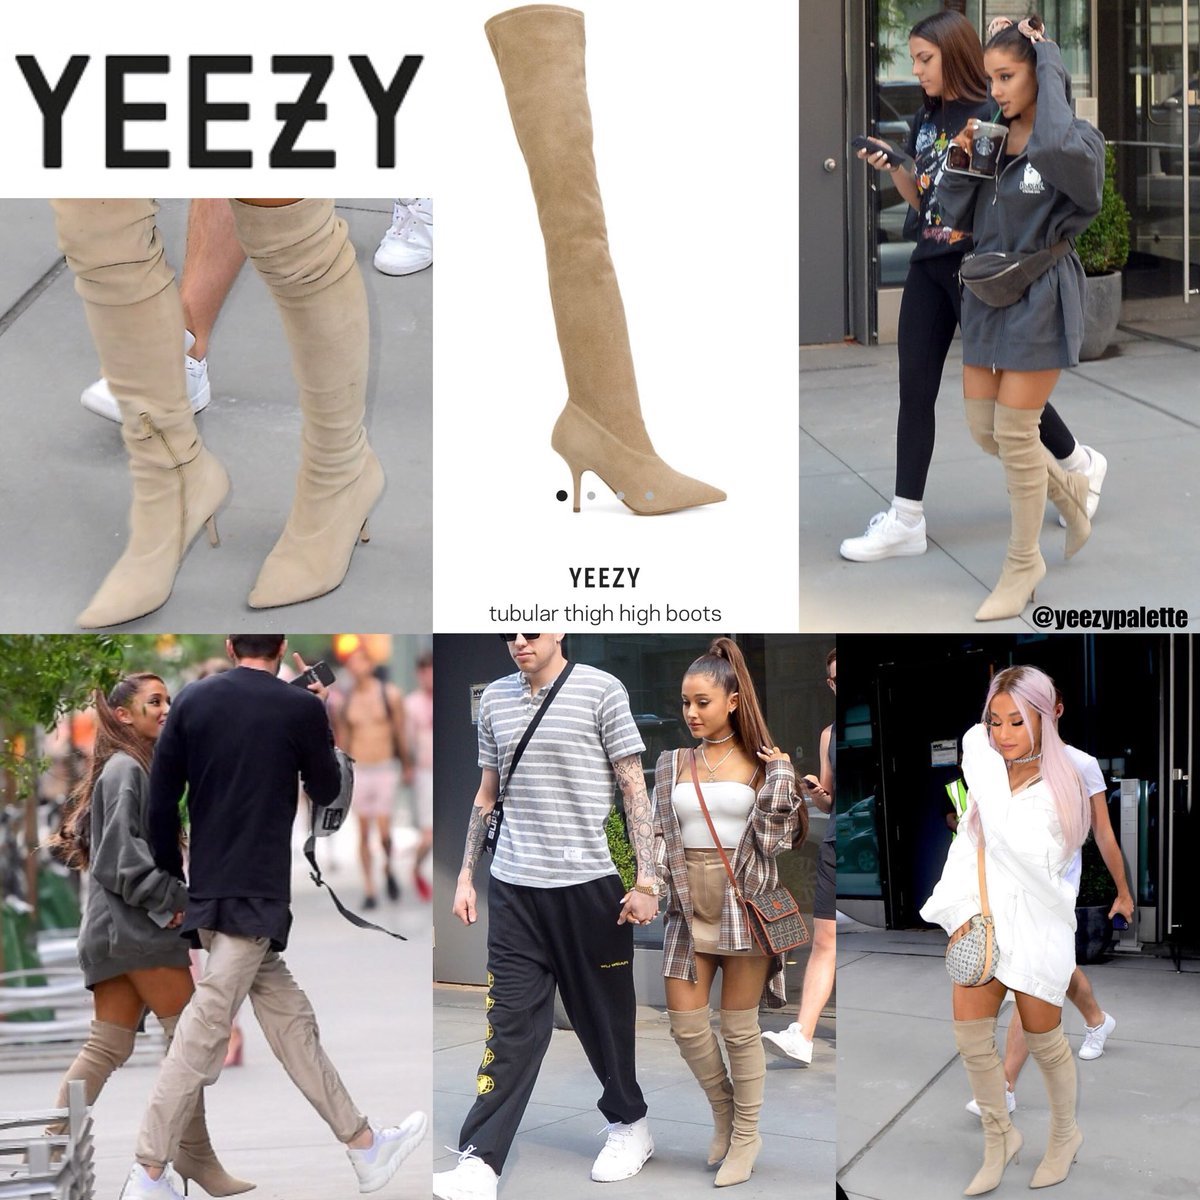 yeezy thigh high boots